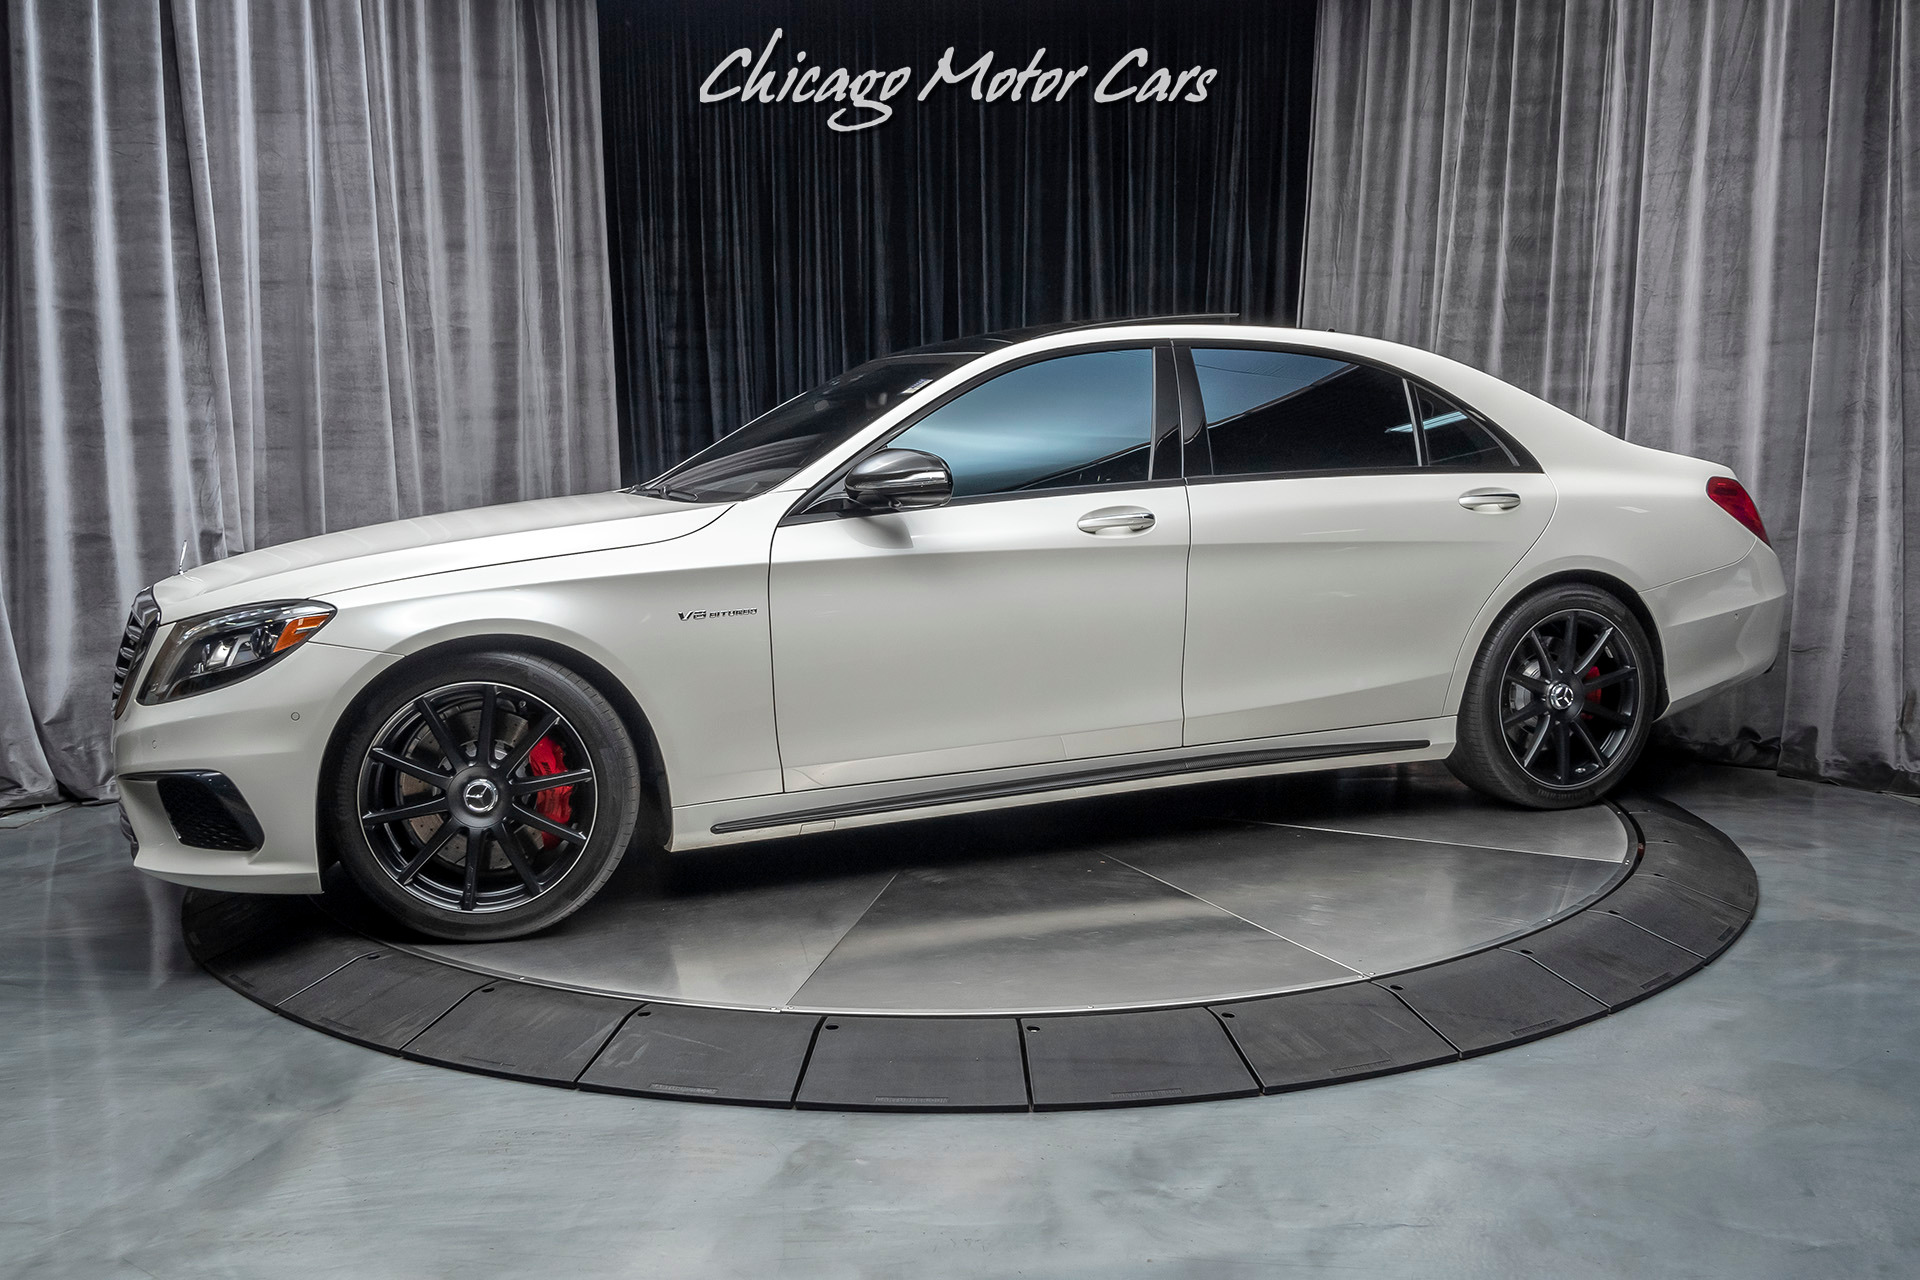 Used 2016 Mercedes-Benz S-Class S63 AMG Sedan Only 12k Miles! Carbon Fiber!  LOADED Perfect! For Sale (Special Pricing) | Chicago Motor Cars Stock #17067